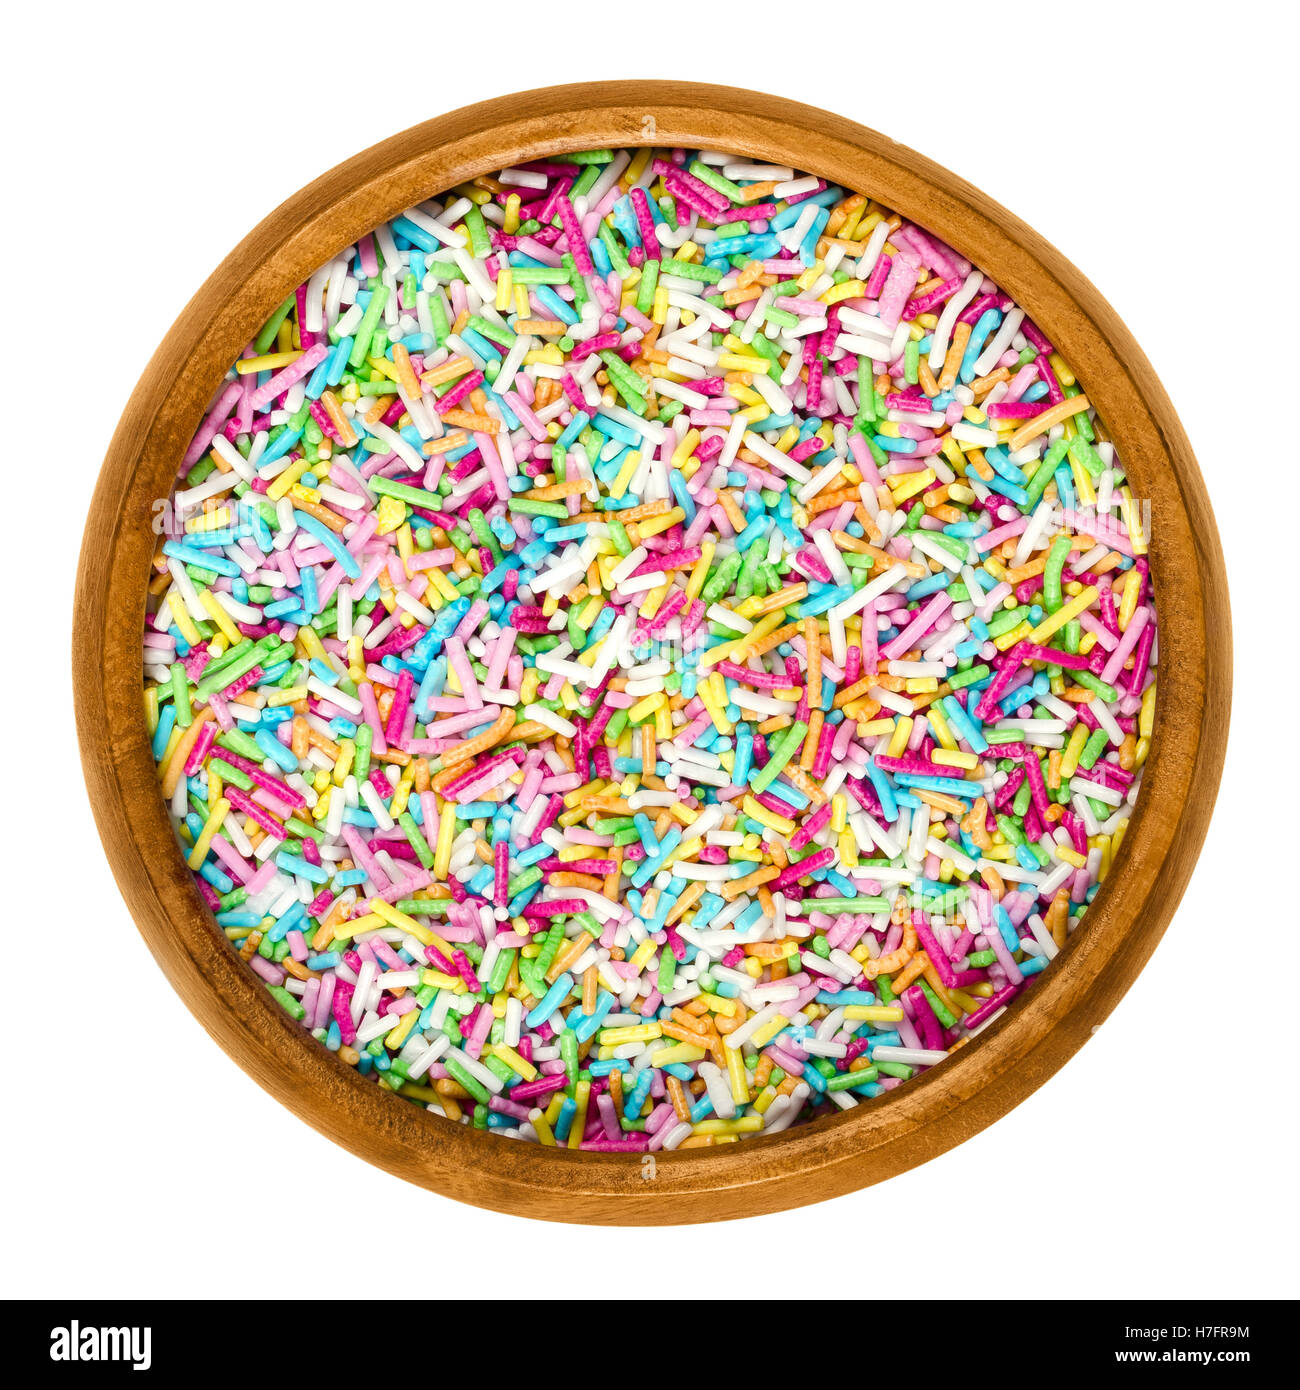 Colorful sugar sprinkles for food decorations in wooden bowl on white background. Multi colored bakery decoration ingredient. Stock Photo